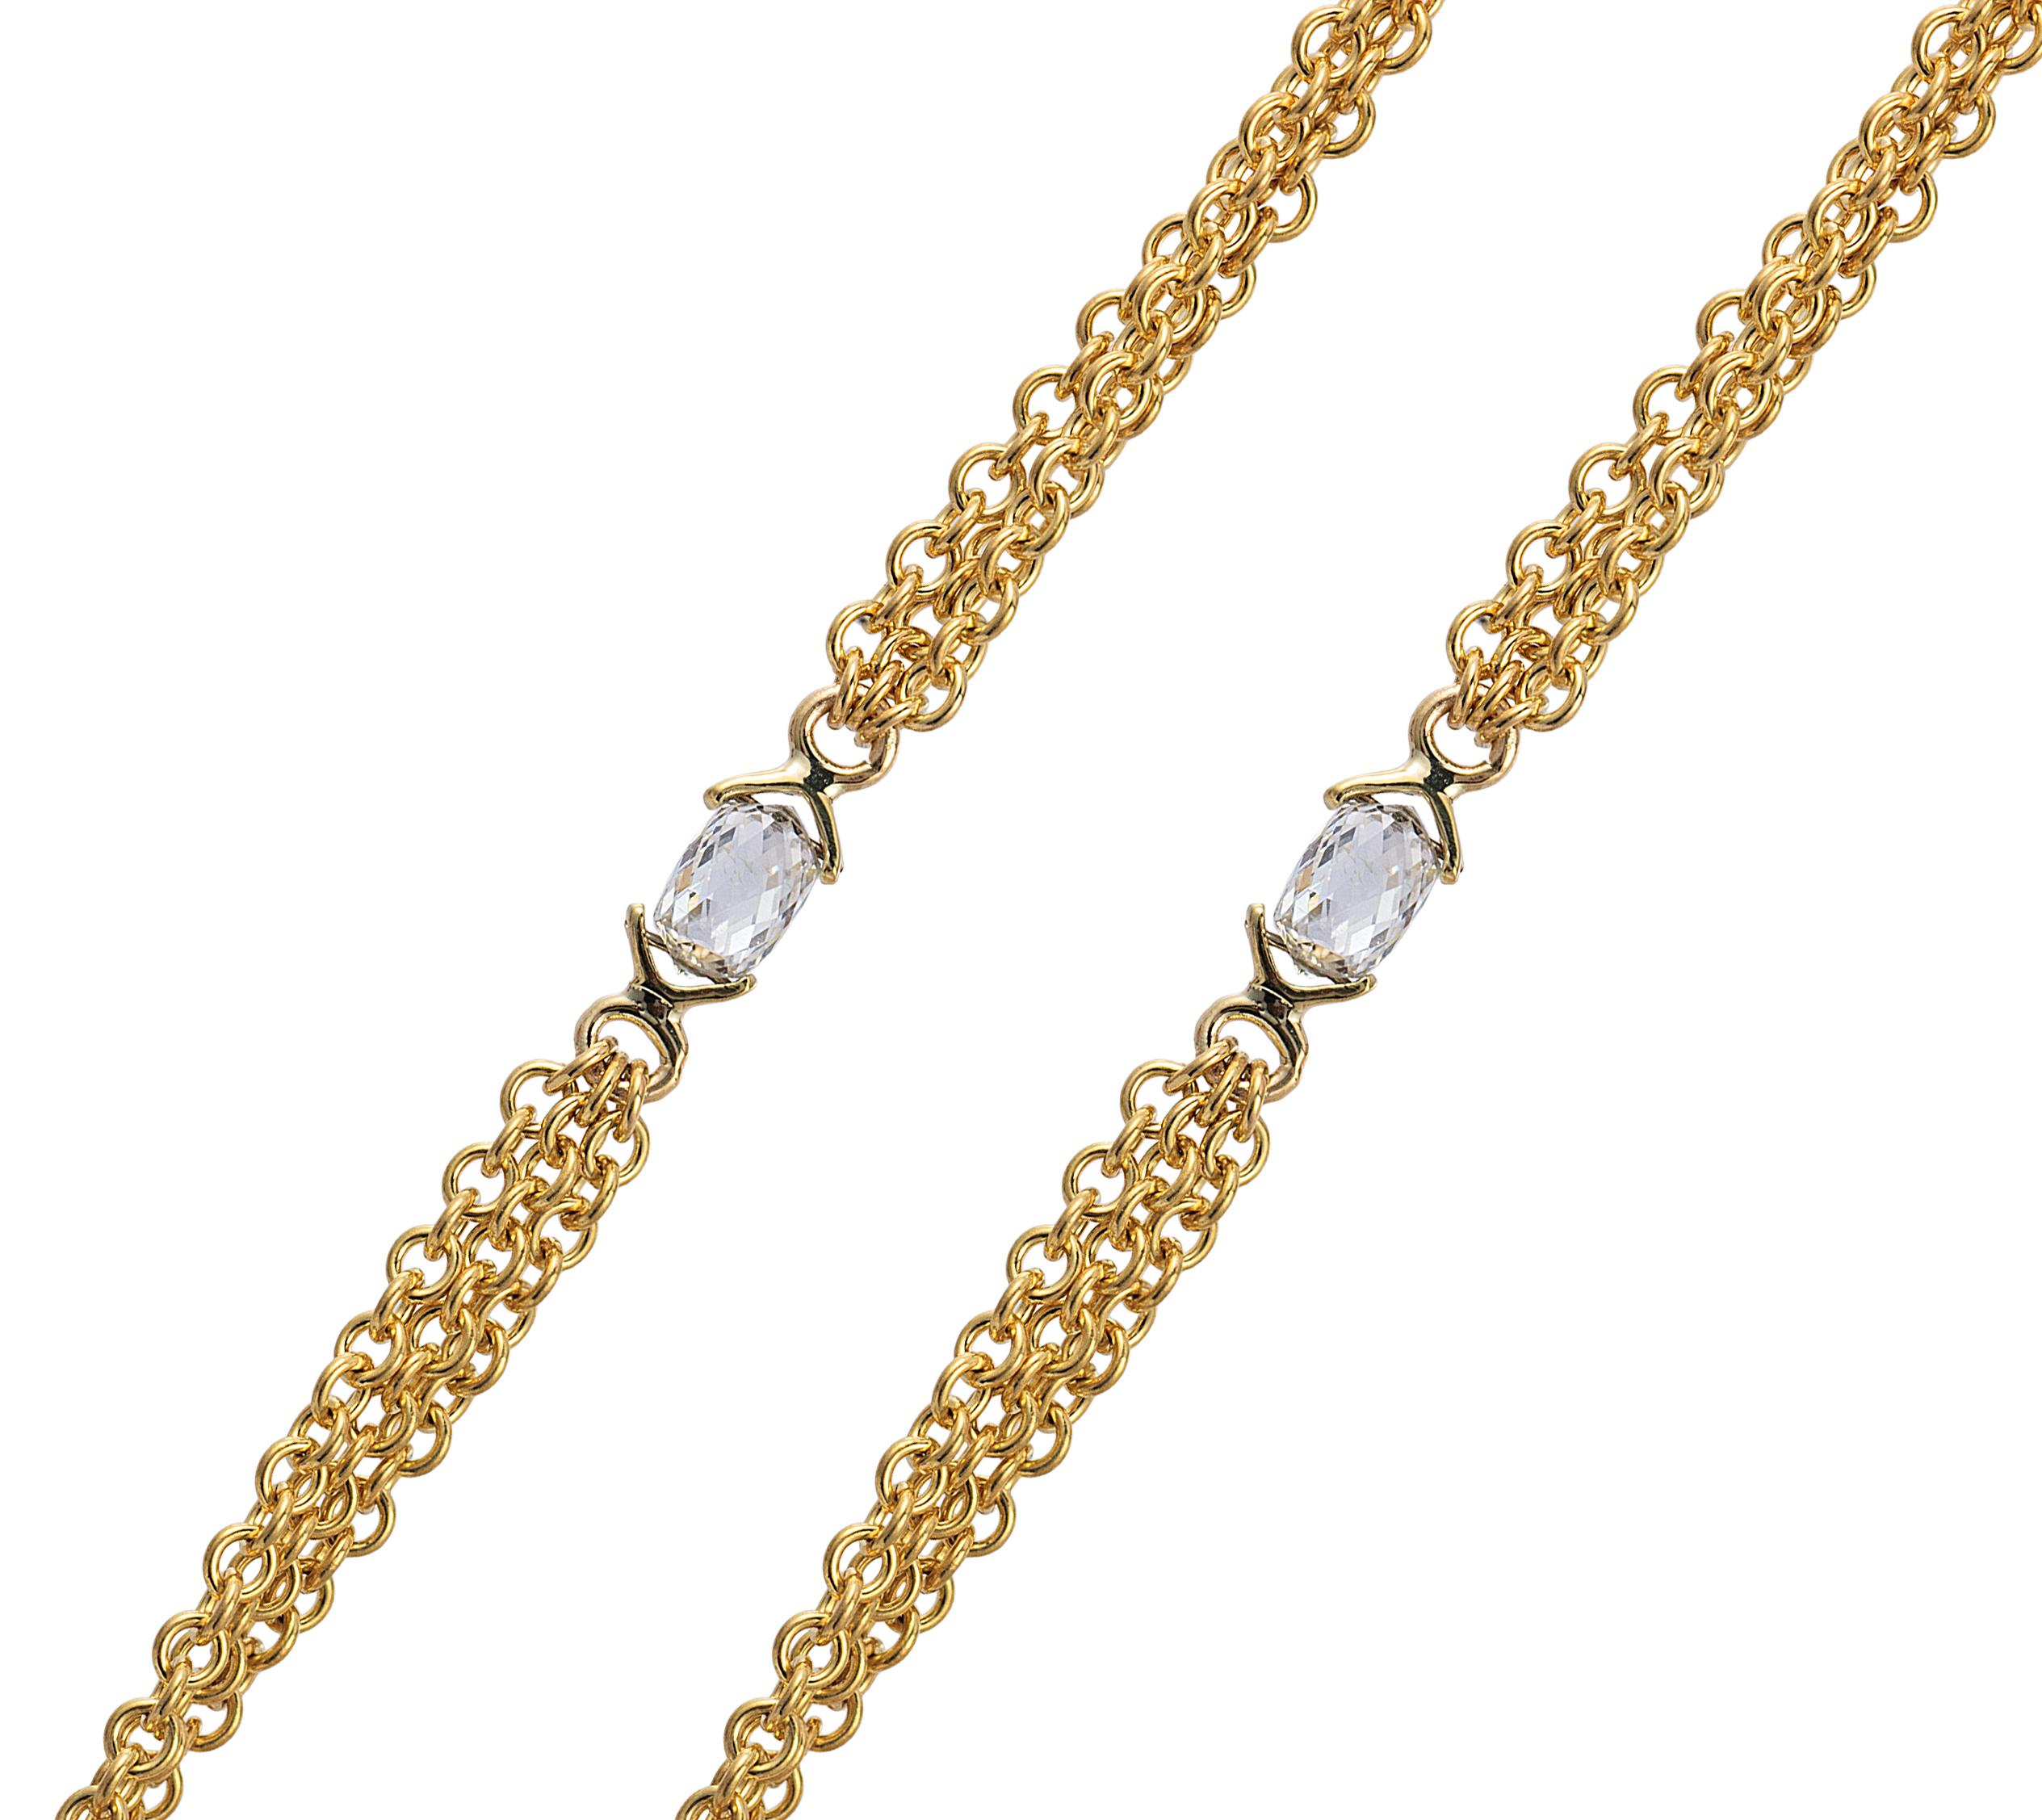 Briolette Cut Handmade Double Sided Diamond Briolette Chain Necklace For Sale